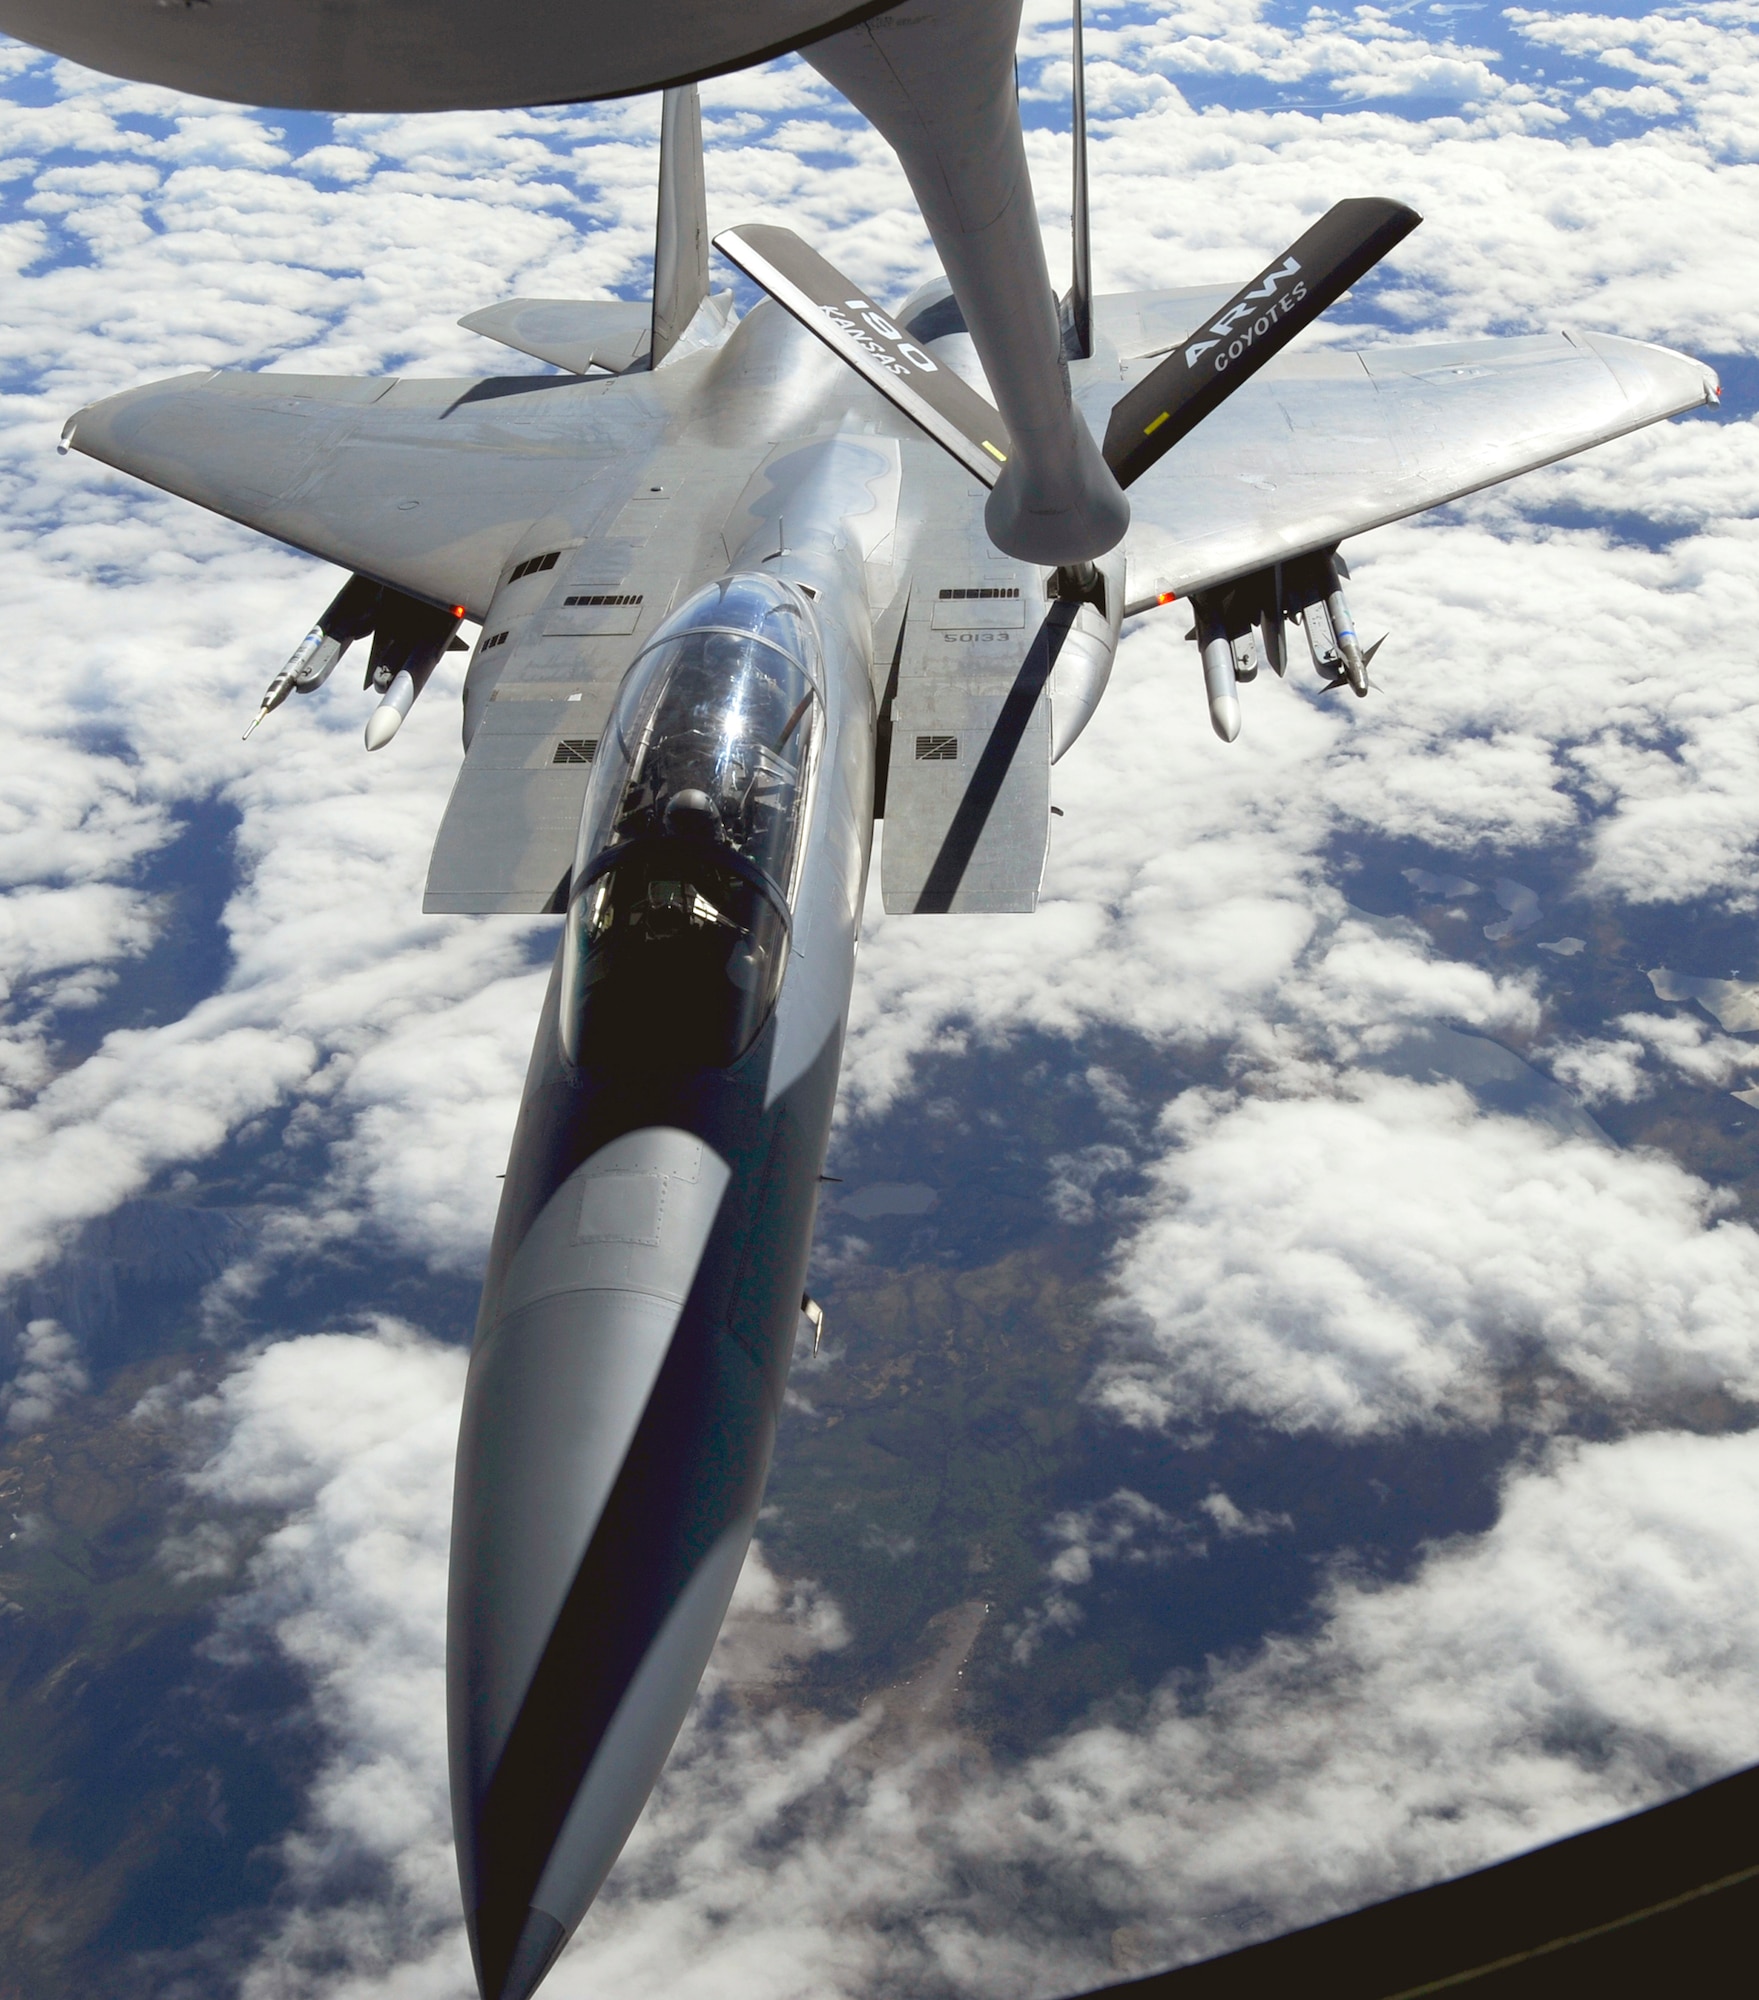 An F-15 Eagle from Elmendorf Air Force Base, Alaska, receives fuel from a KC-135 Stratotanker from Kansas Air National Guard's 190th Air Refueling Wing. The refueling took place over Alaska May 26, 2010.  (U.S. Air Force photo/Staff Sgt. Brian Ferguson)
